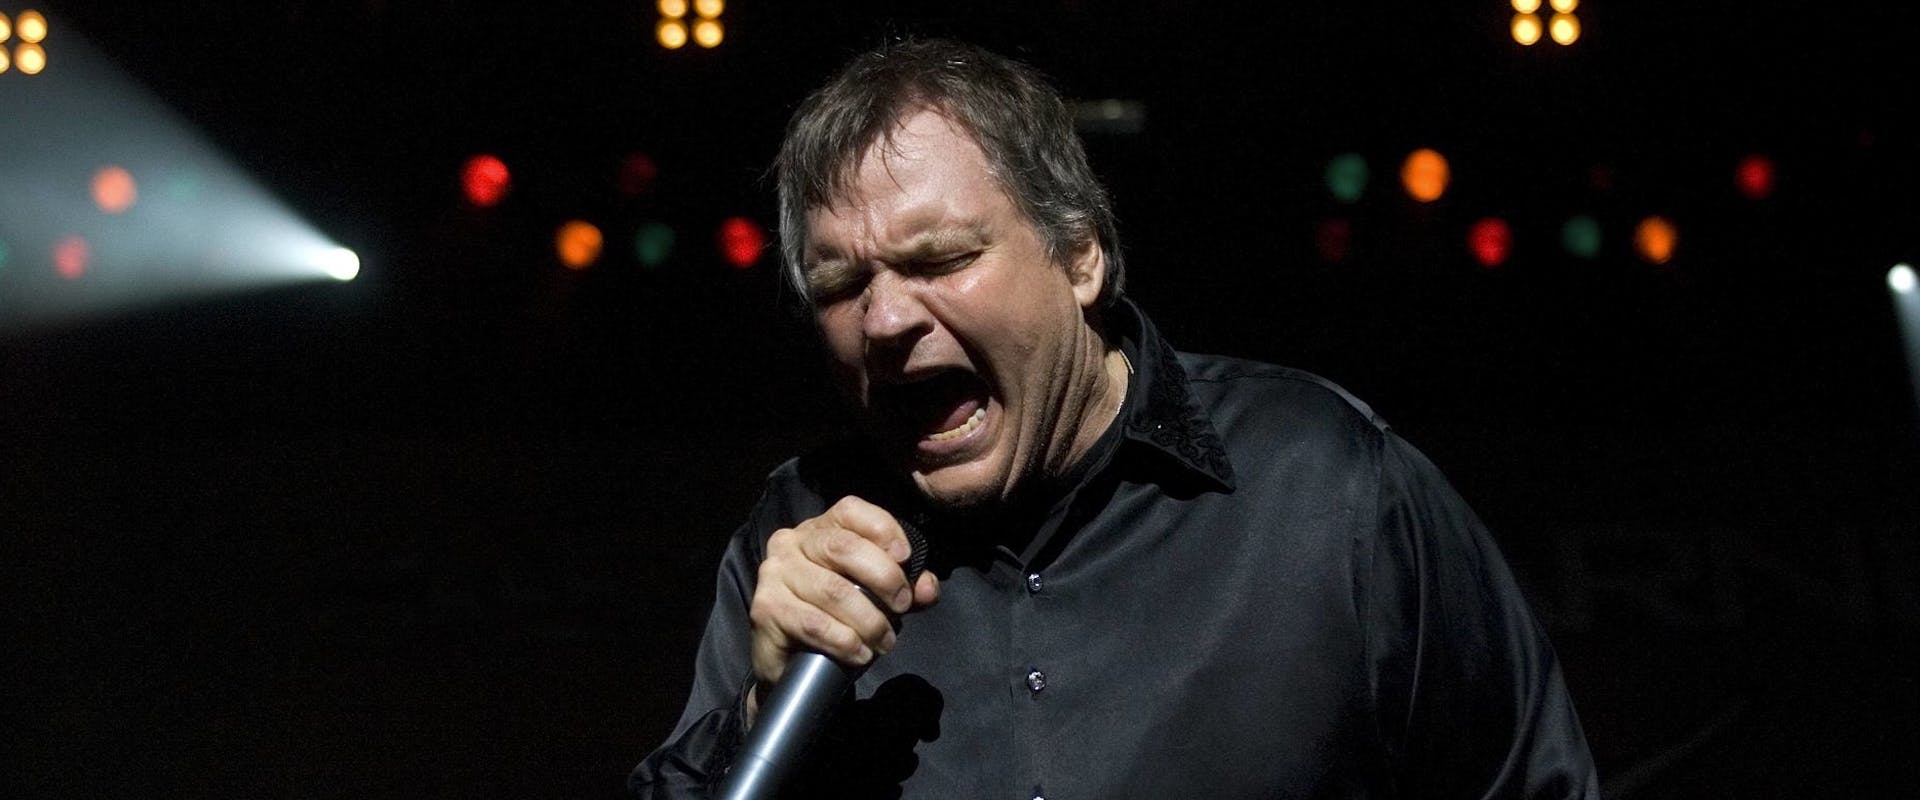 Photo of MEAT LOAF, Meat Loaf performing on stage 